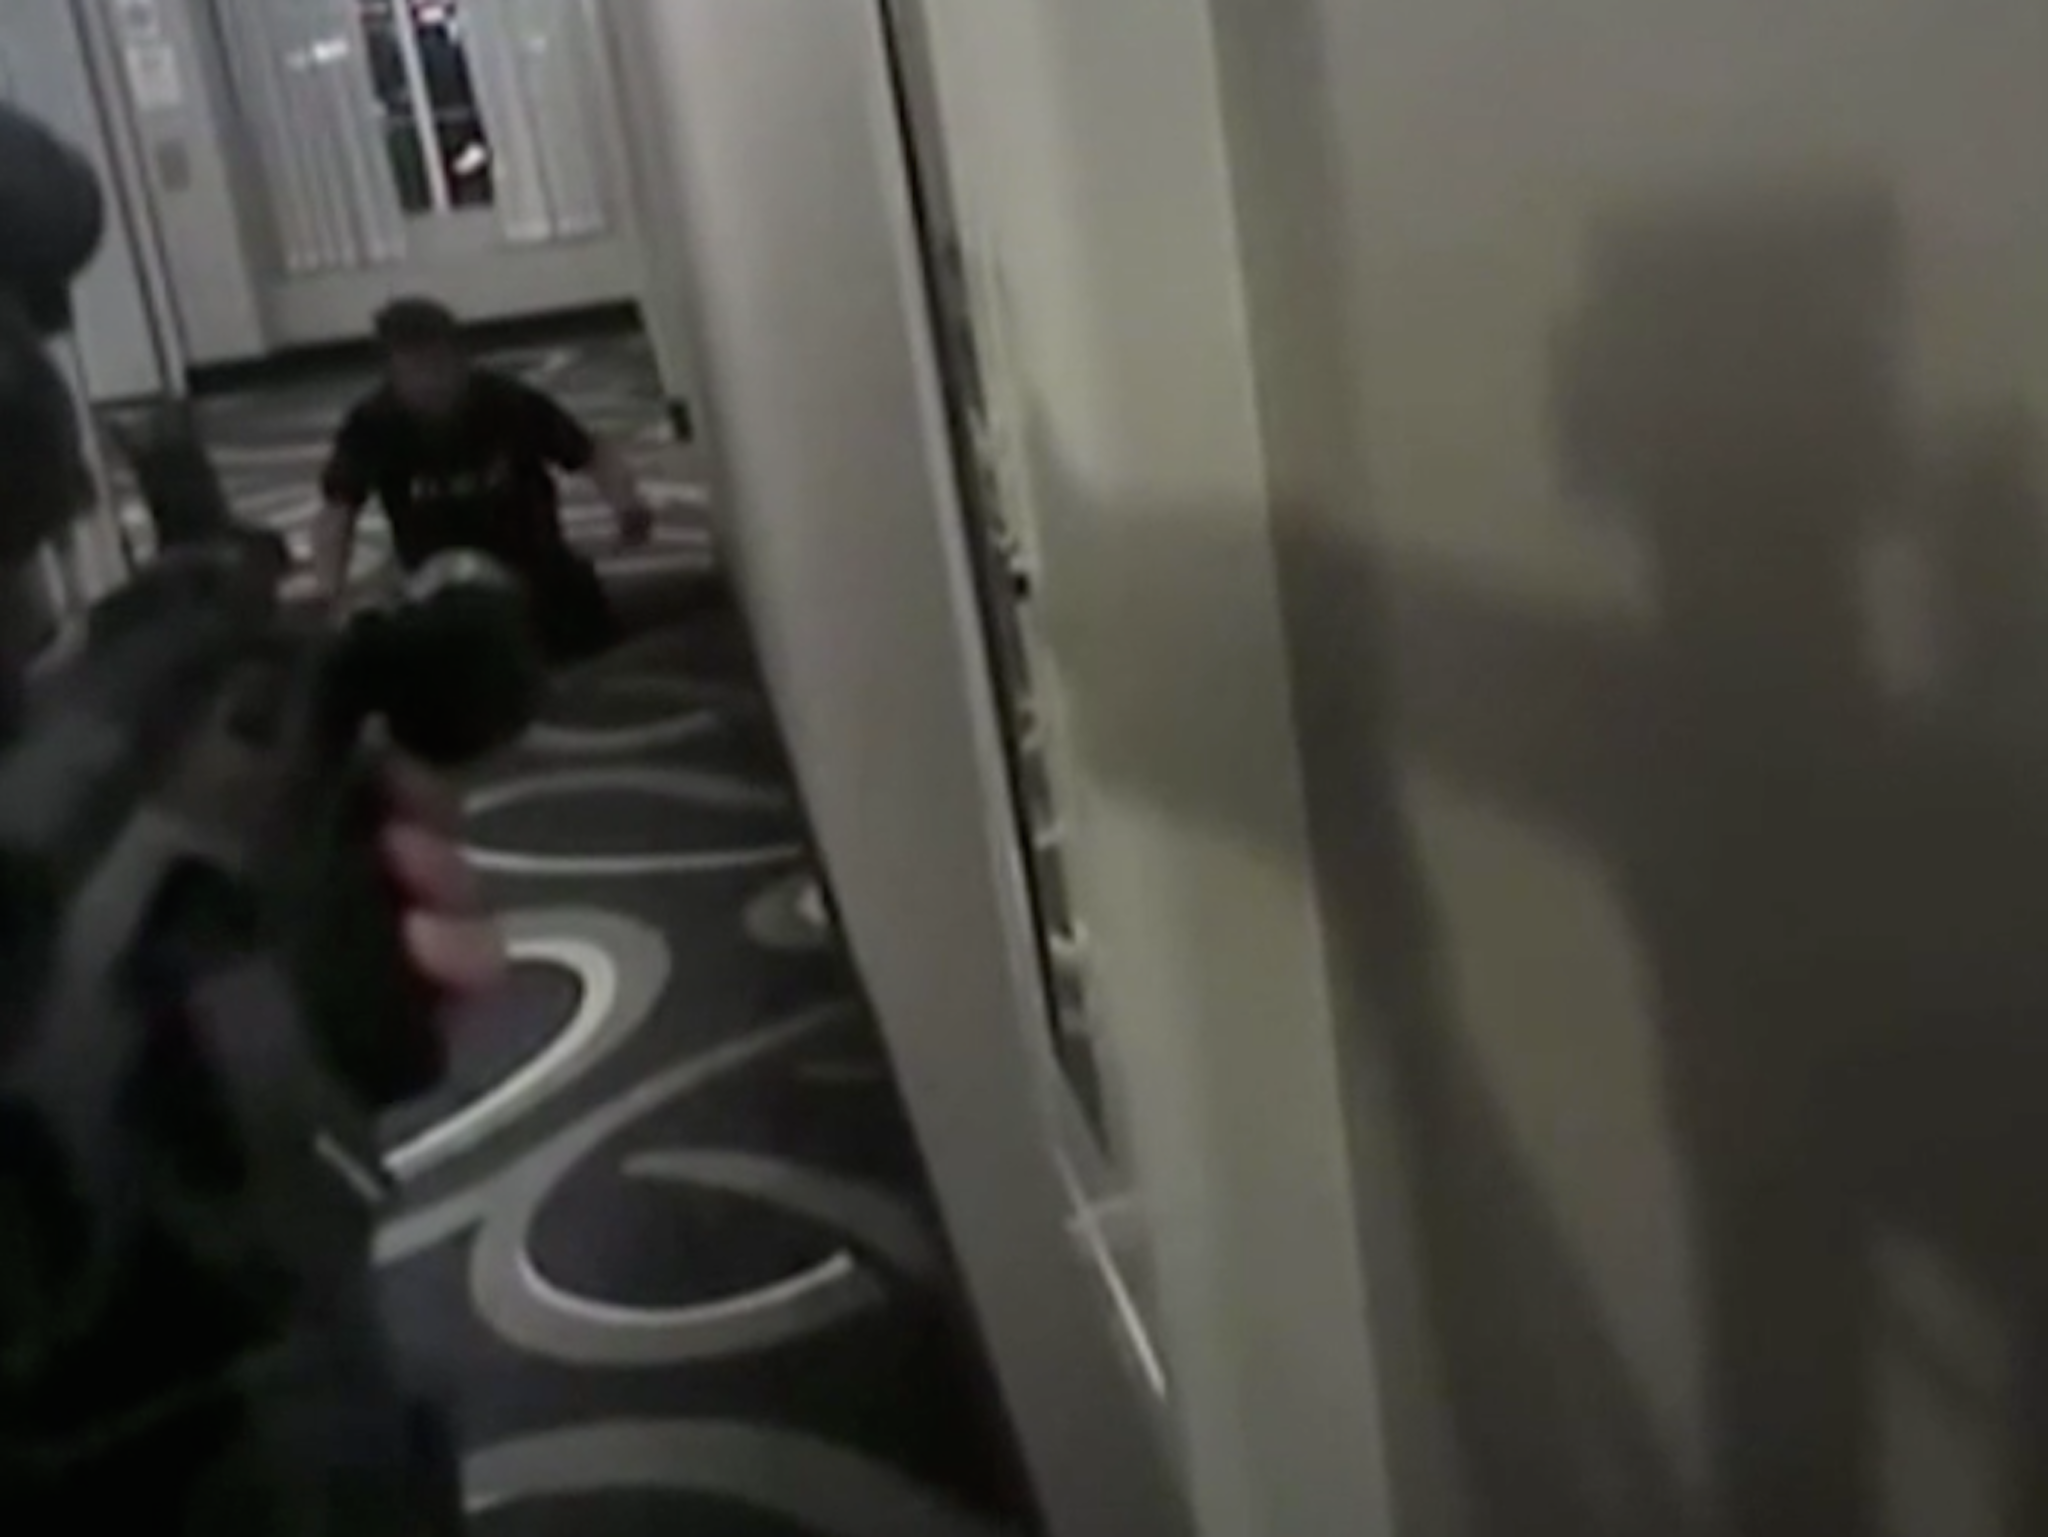 Daniel Shaver is seen putting his hands up before police shoot him